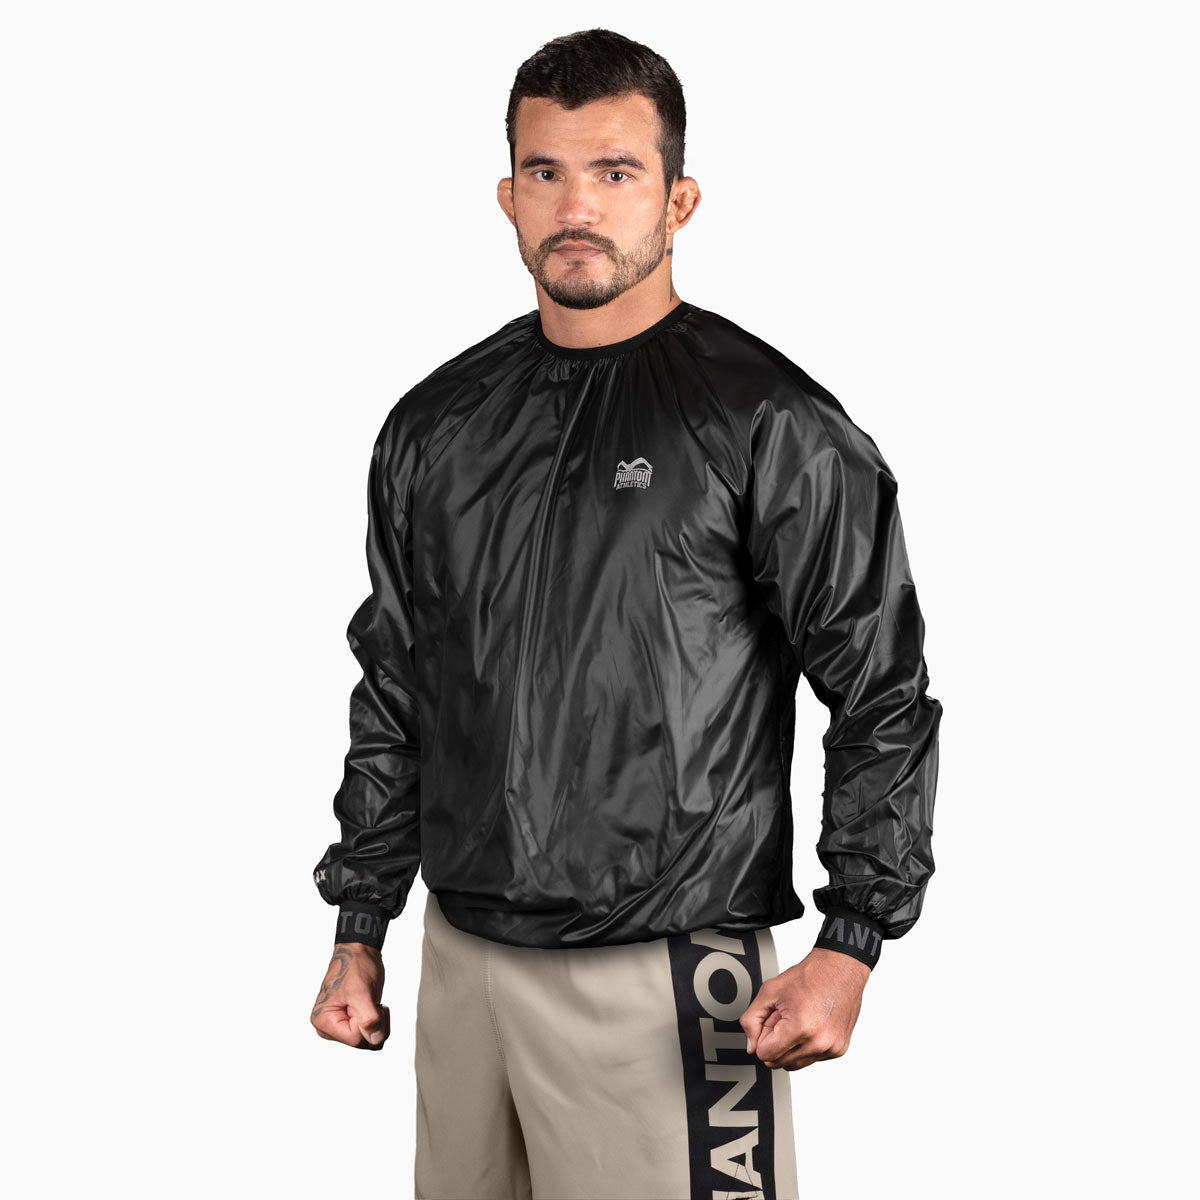 Phantom NOMAX-S sweat jacket for weight making in martial arts.